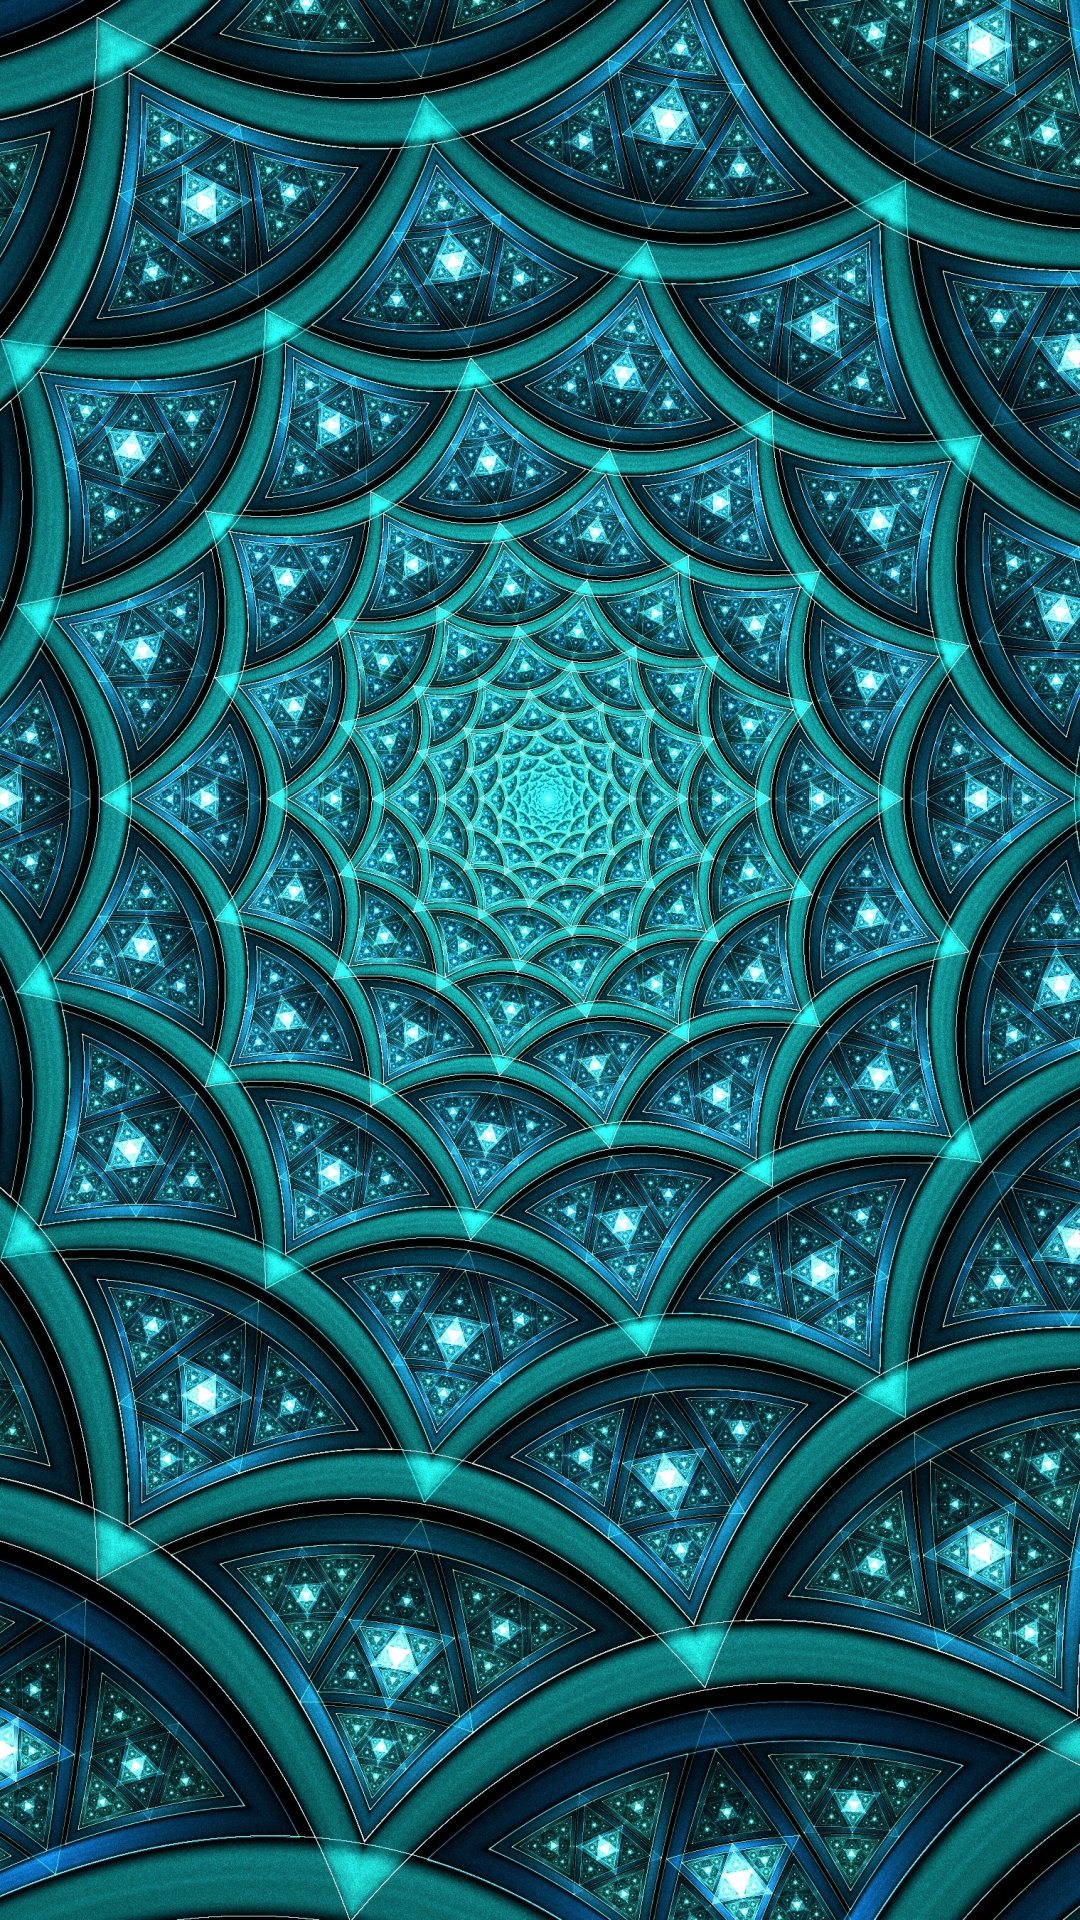 AbstractFractal 1080x1920 Wallpaper ID Mobile Abyss